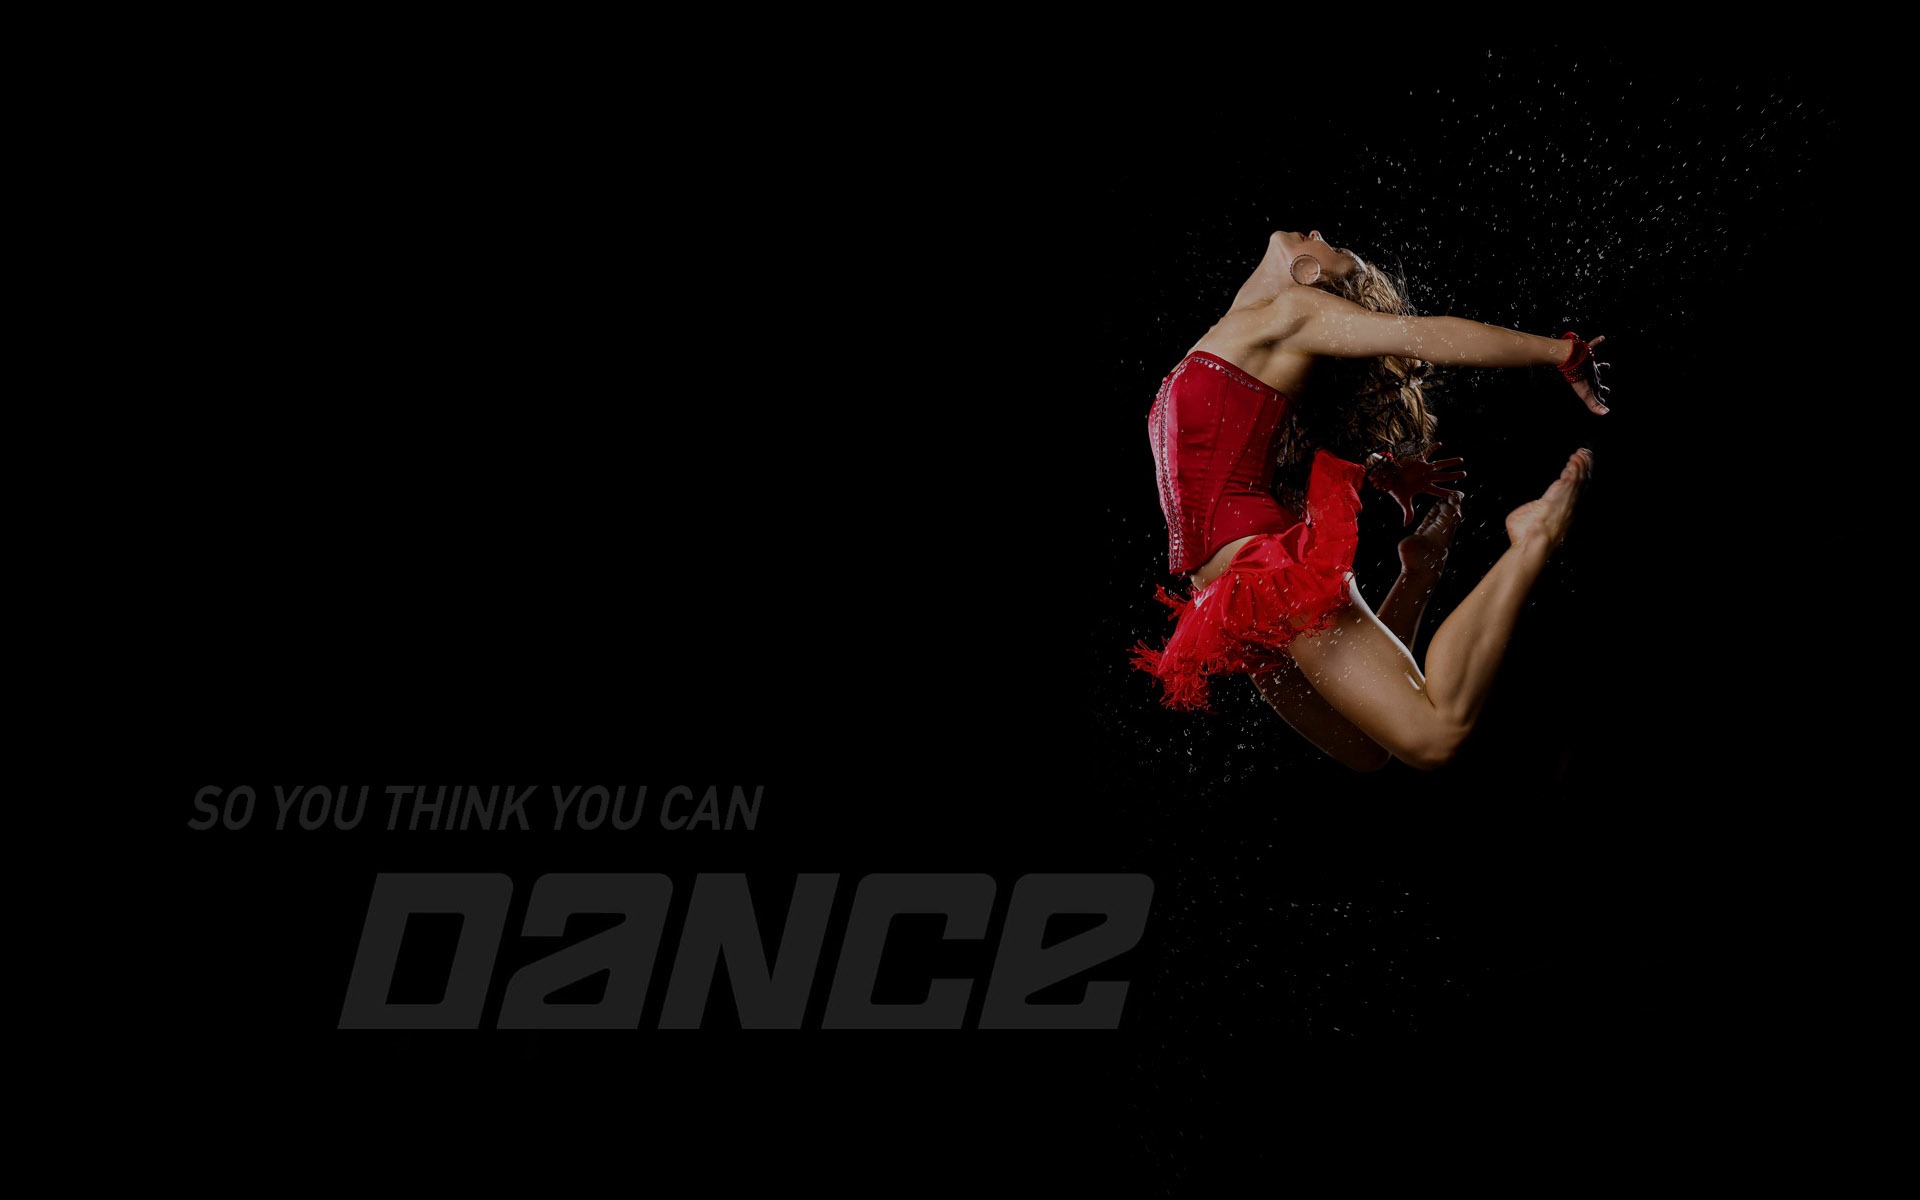 So You Think You Can Dance 舞林爭霸壁紙(二) #1 - 1920x1200